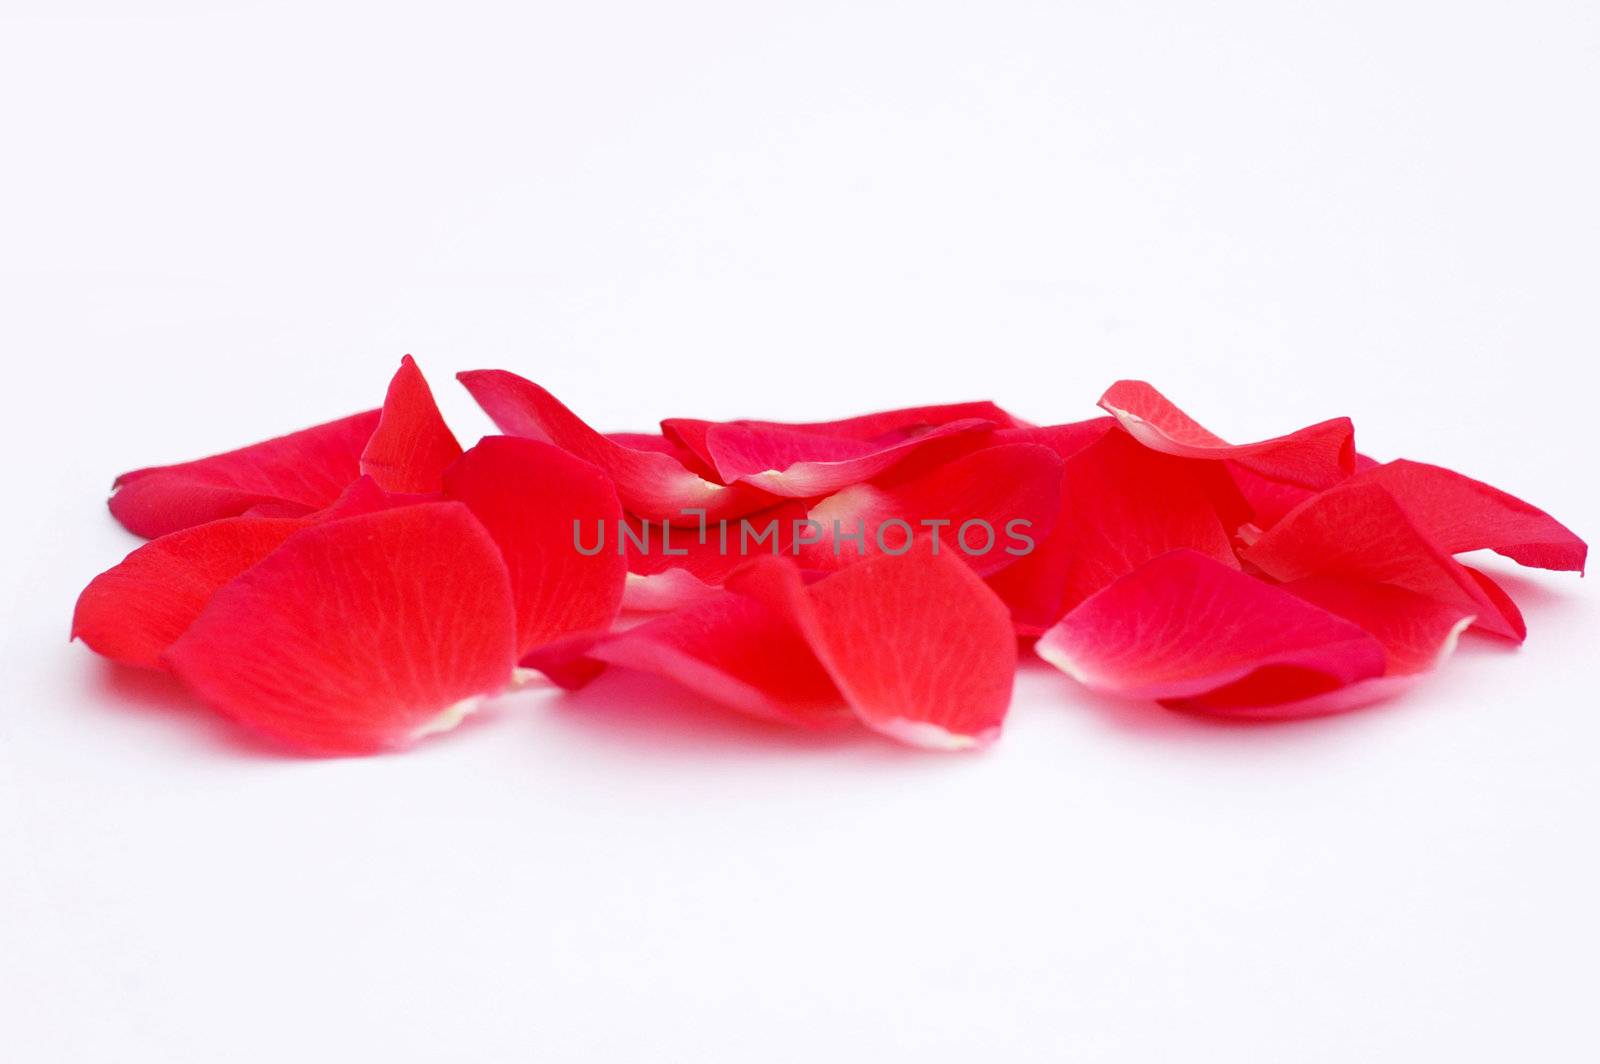 Some red rose petals by Bestpictures